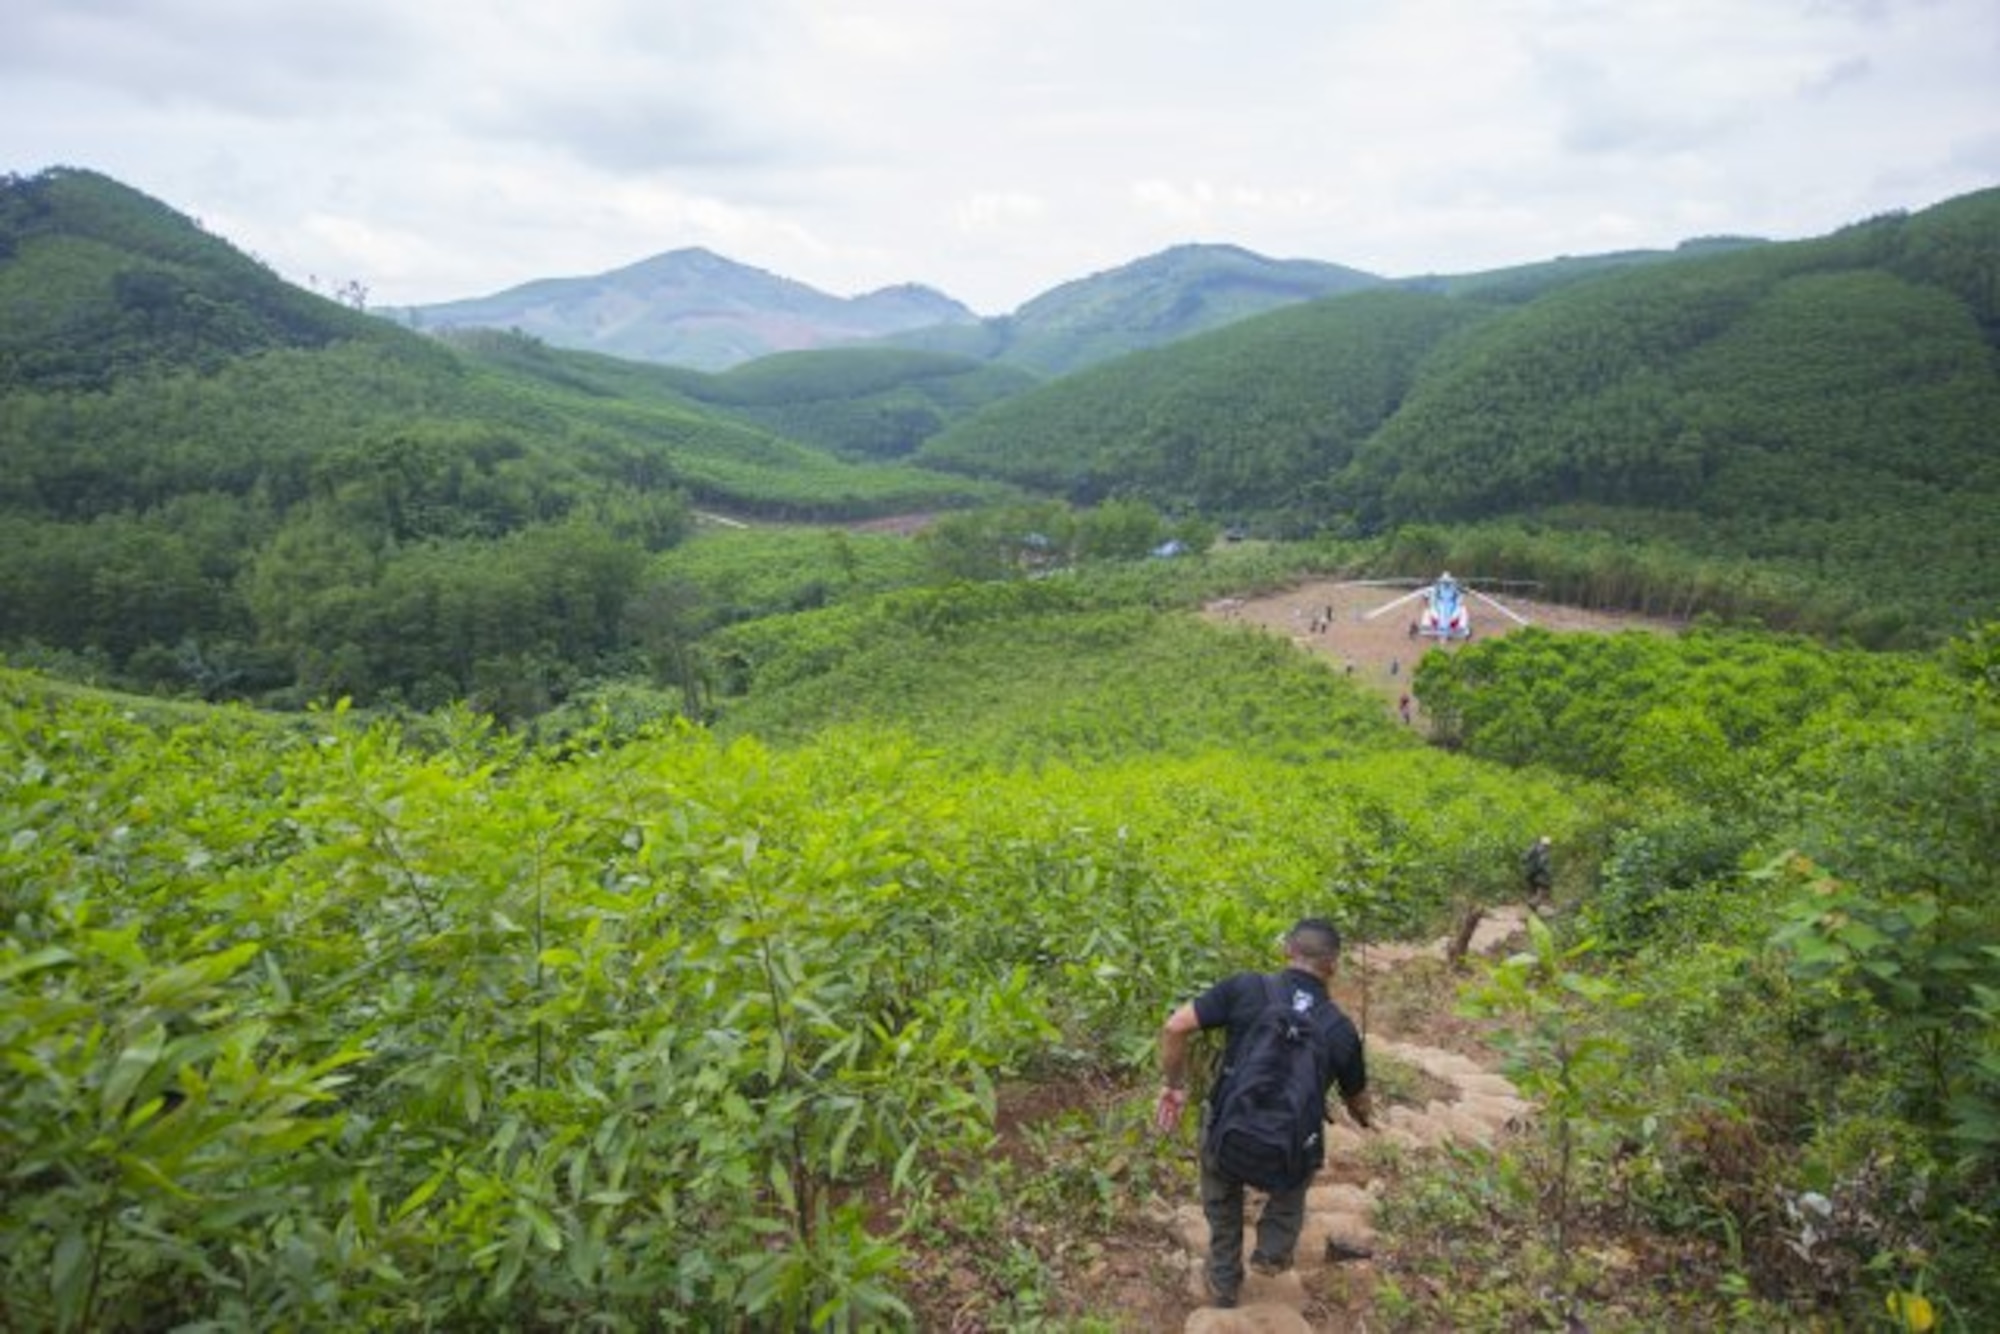 A member of the Defense POW/MIA Accounting Agency hikes a trail down from an excavation site March 17, 2018, in Quang Ngai province, Vietnam, where an American pilot crashed during the Vietnam War. A joint recovery team climbed 700 feet in elevation along a half-mile trail every day to the site as part of the mission. (U.S. Army photo by Sean Kimmons)